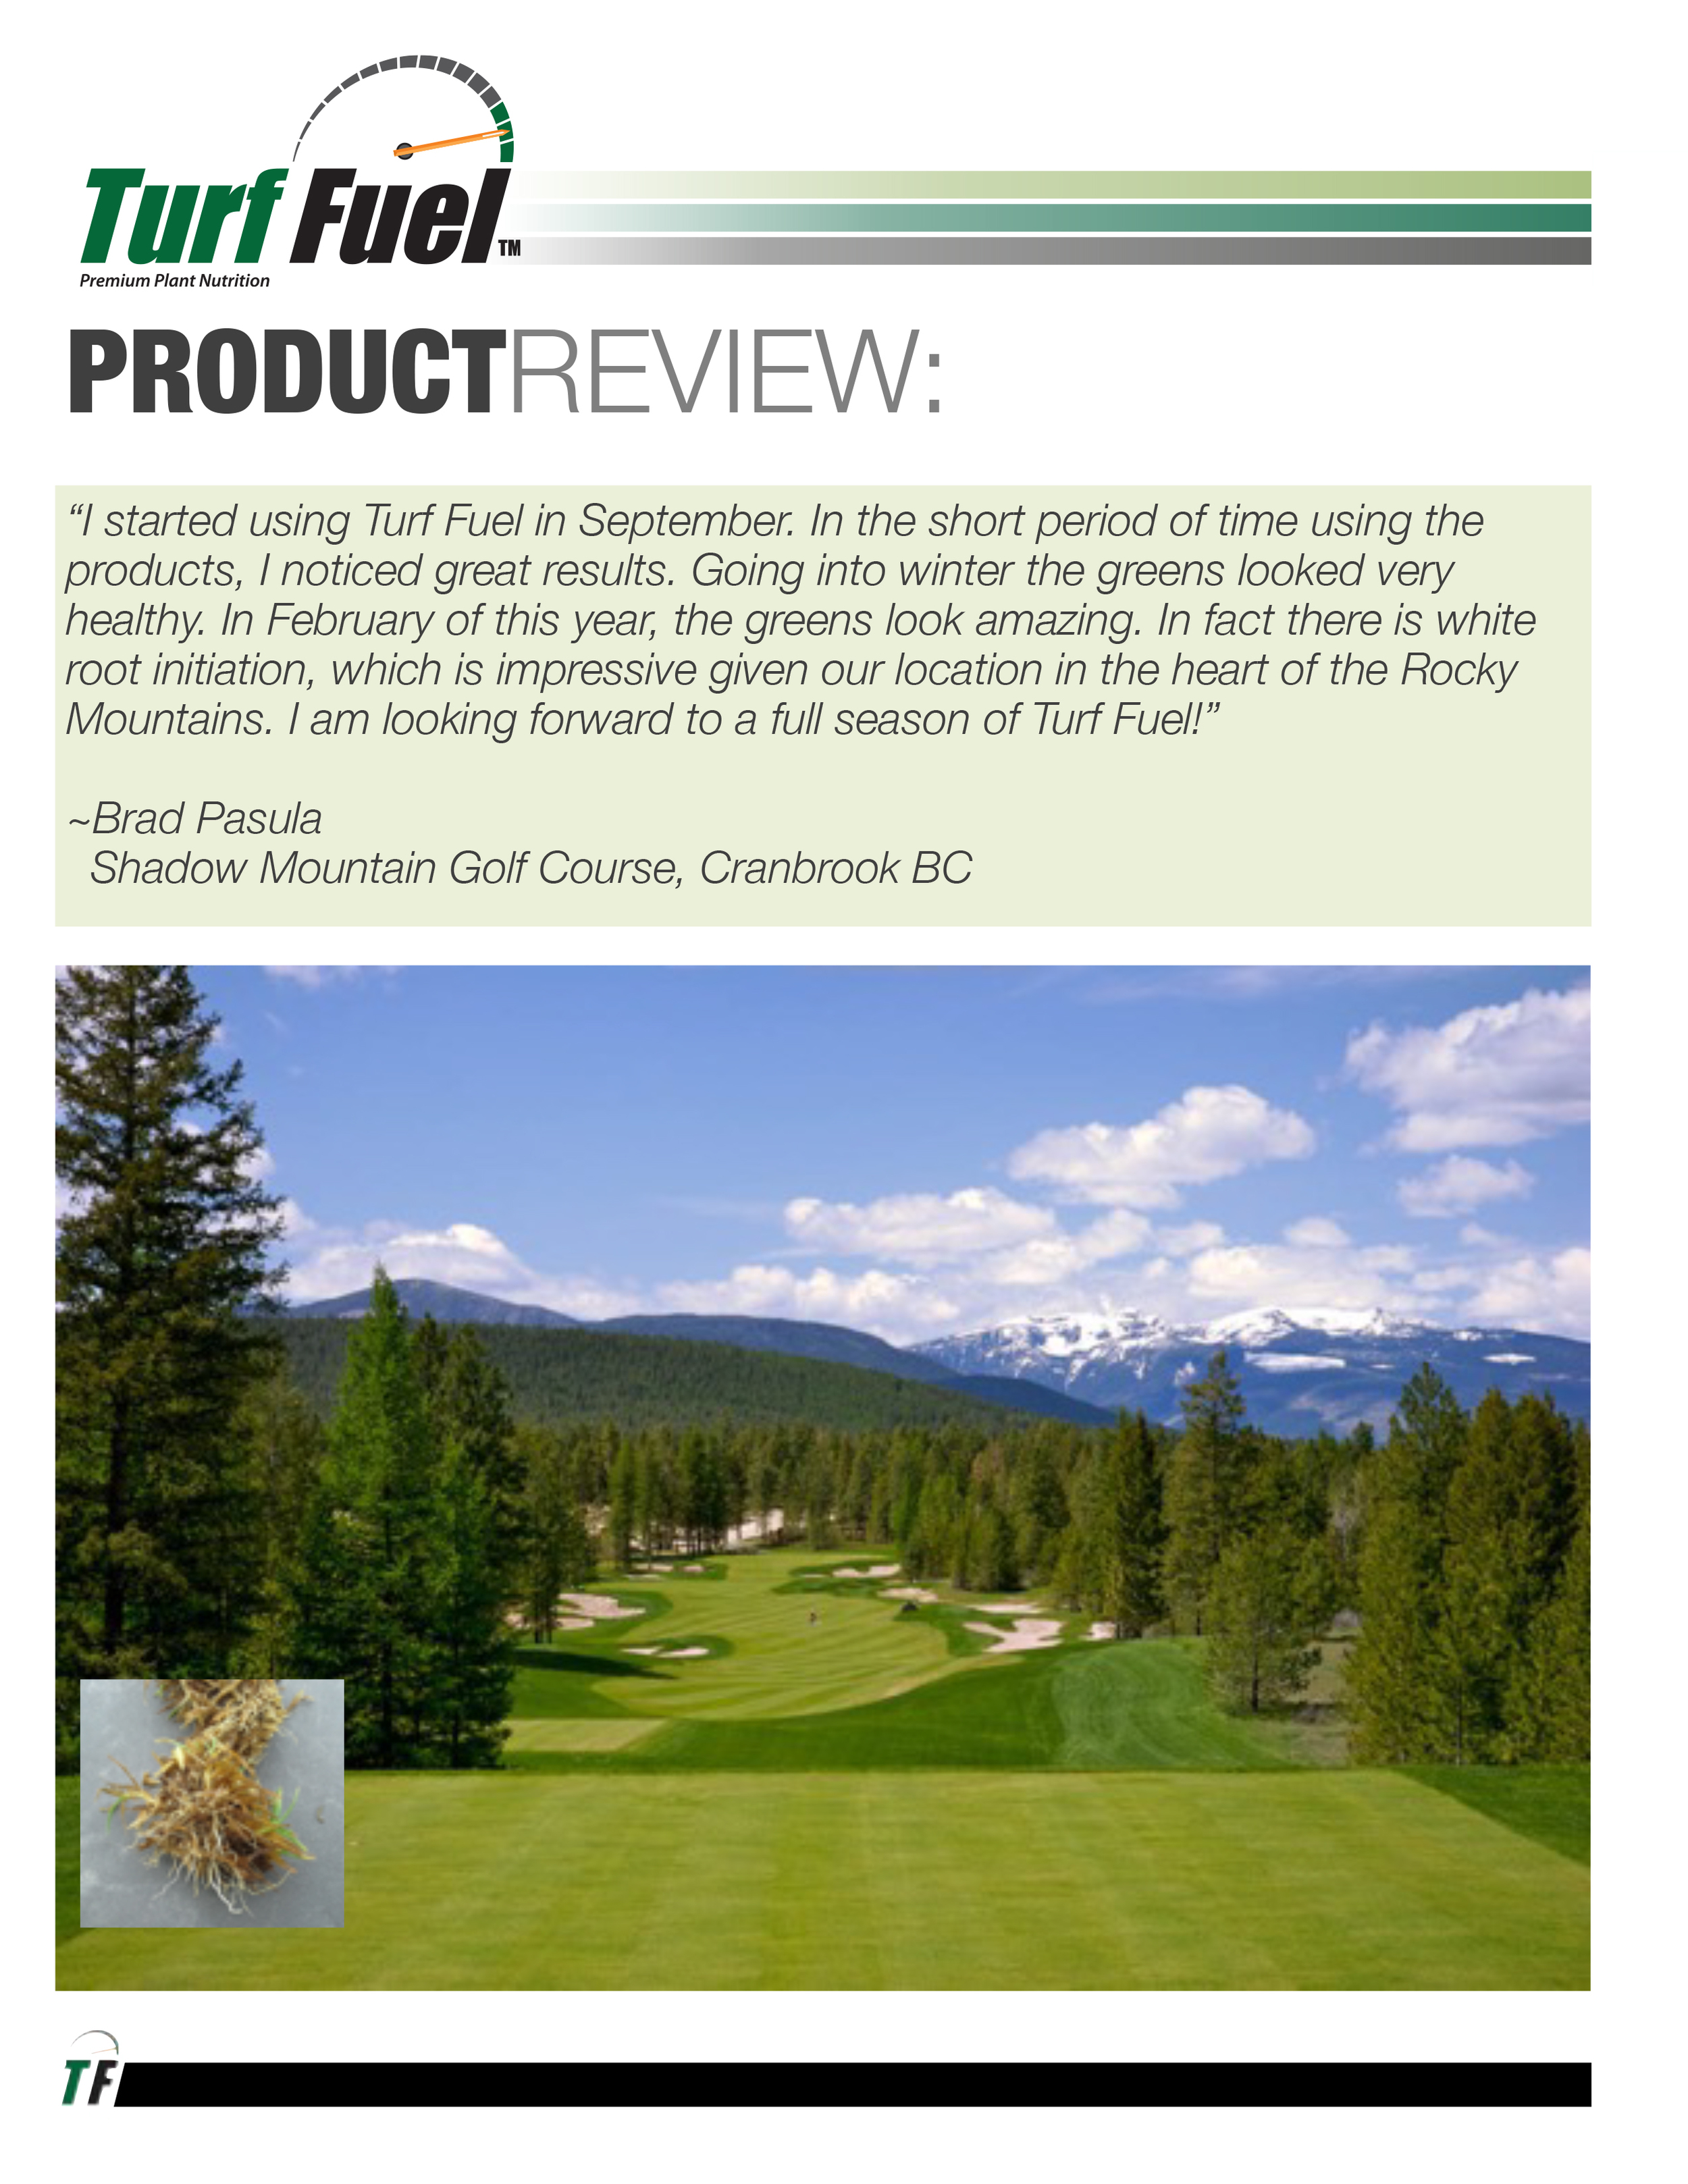 PRODUCT REVIEW Shadow Mountain GC